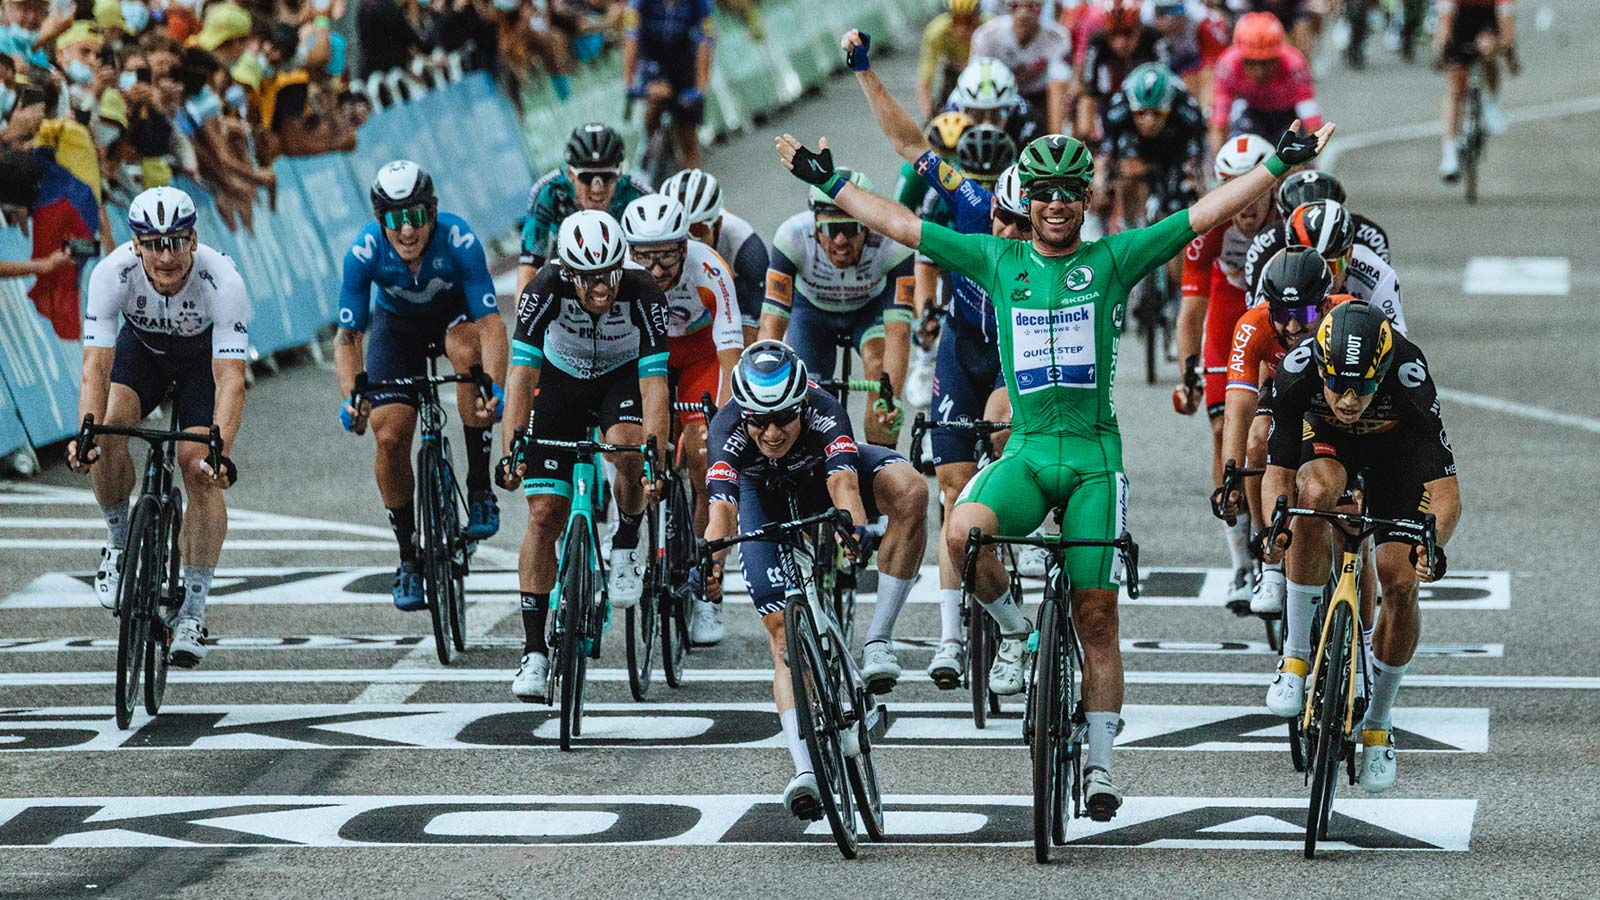 2021 Mark Cavendish 3x Tour de France stage winning green sprinter jersey Specialized S-Works Tarmac SL7, photo by Chris Auld Stage 10 Valence win